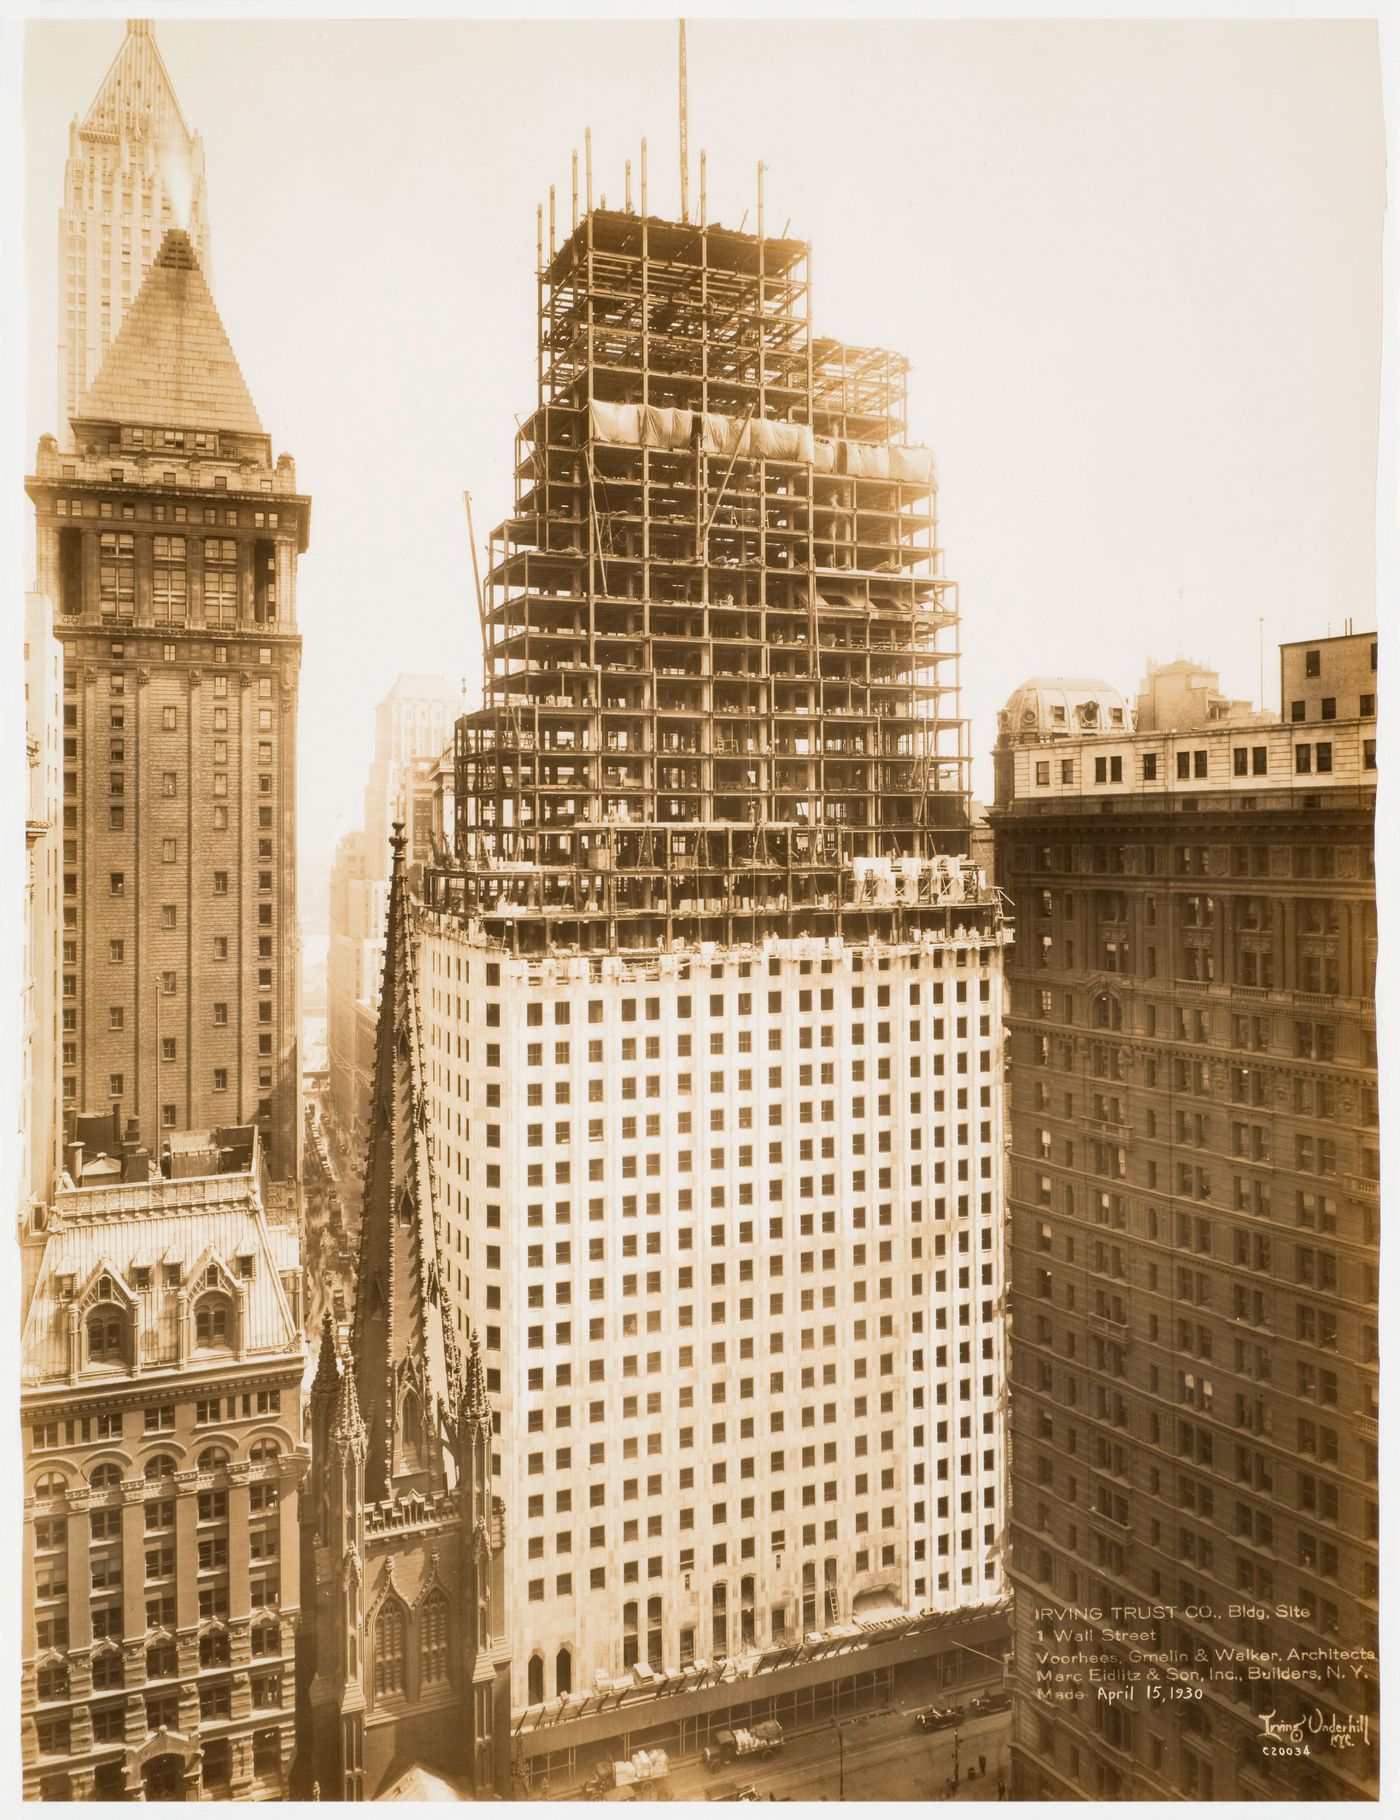 Irving Trust Company Building Site, 1 Wall Street, New York City